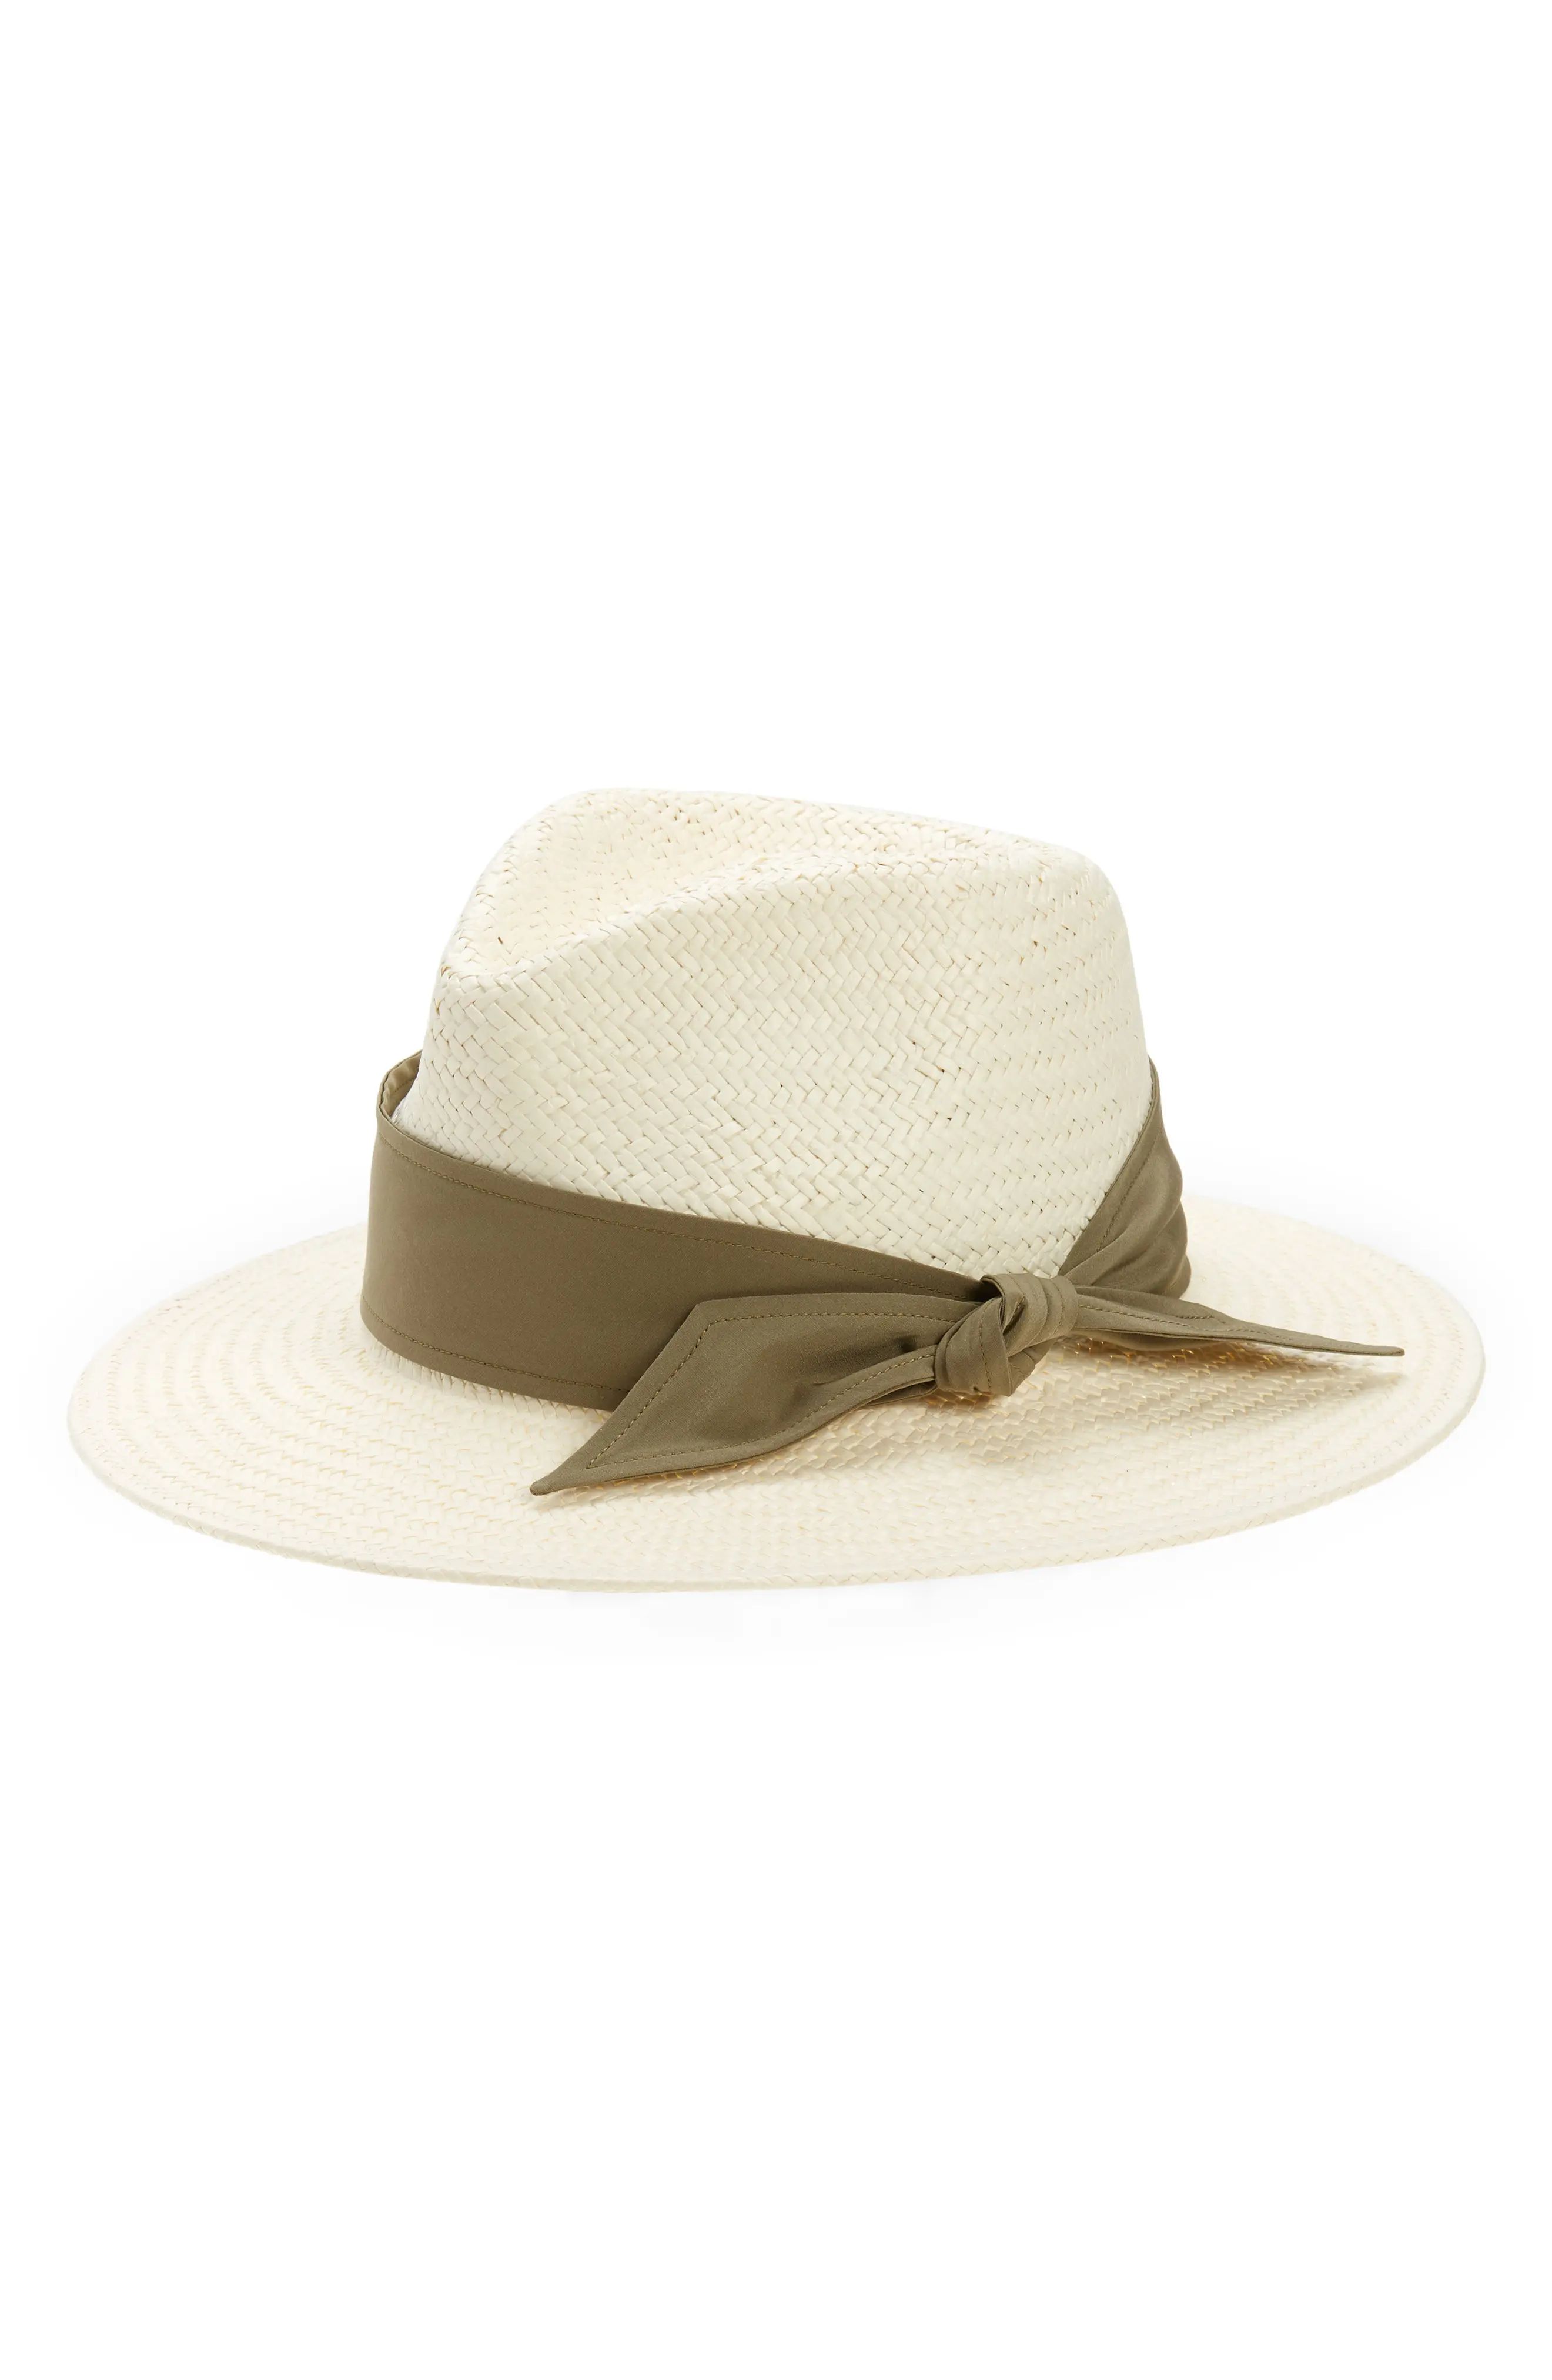 rag & bone Packable Straw Fedora Hat in Ivory at Nordstrom, Size Small | Nordstrom